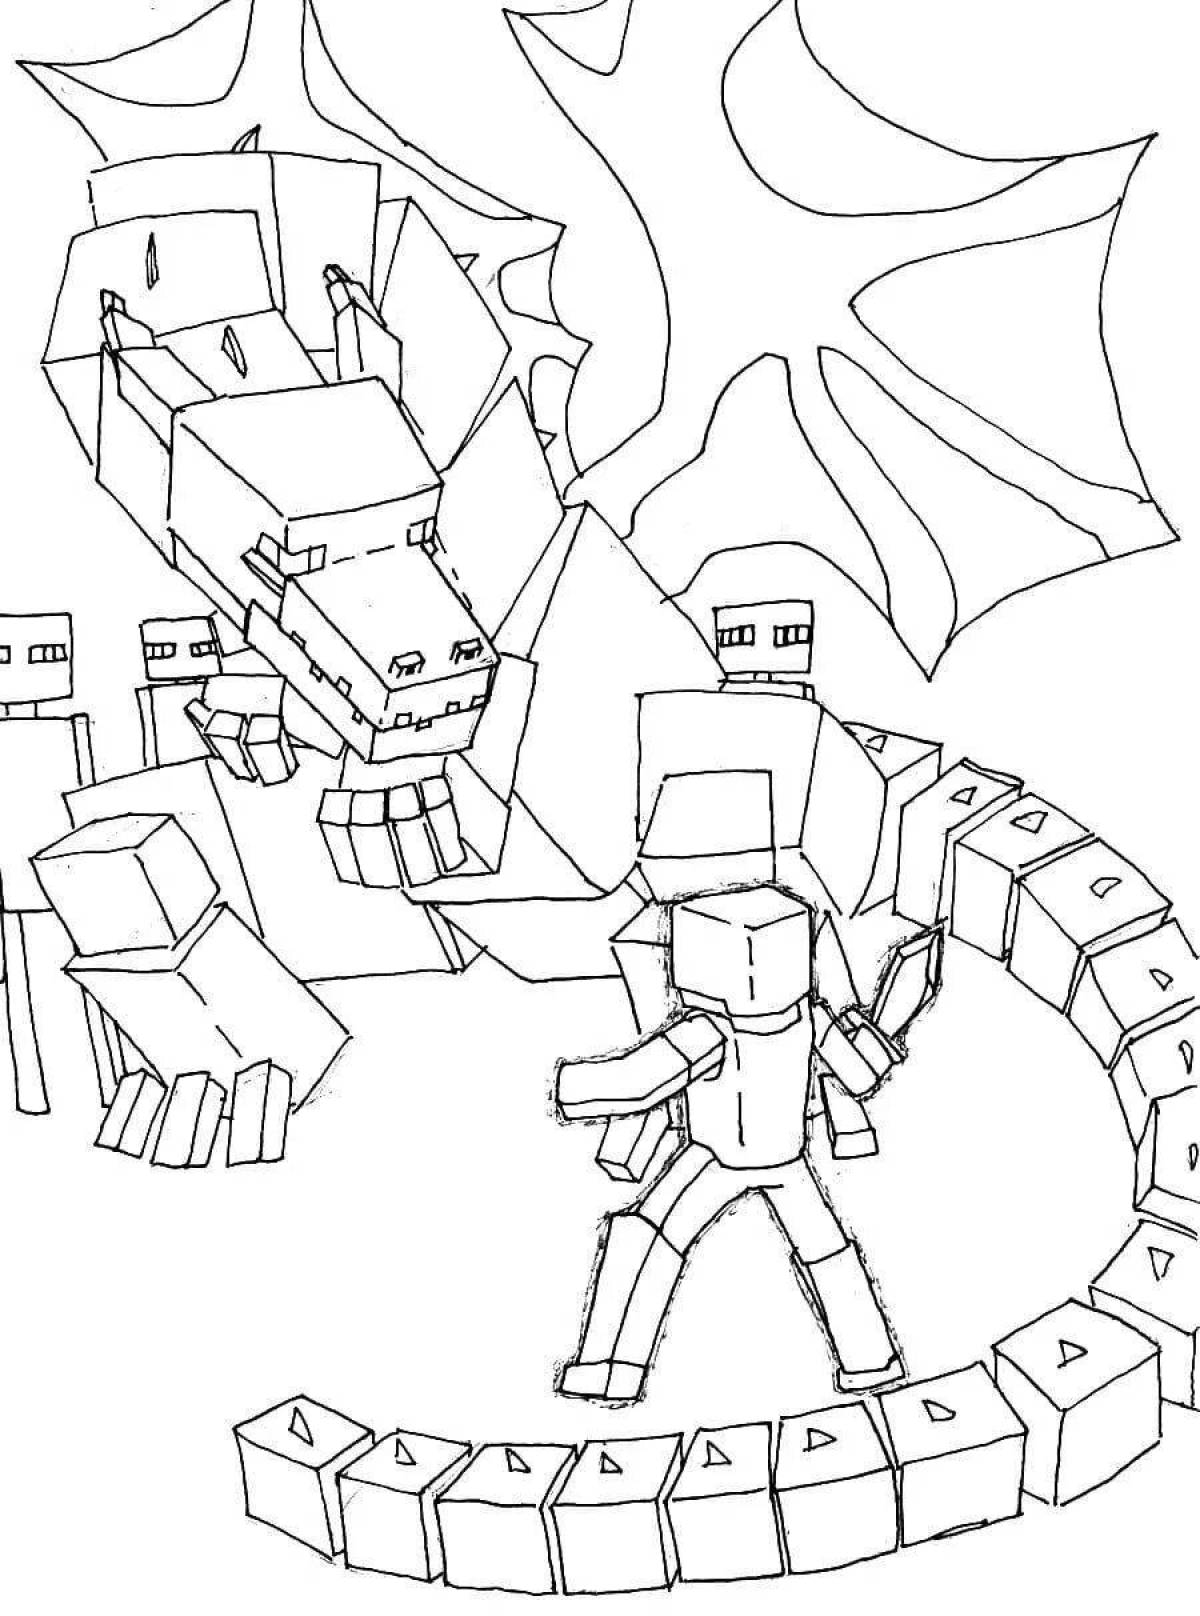 Great ender world coloring page